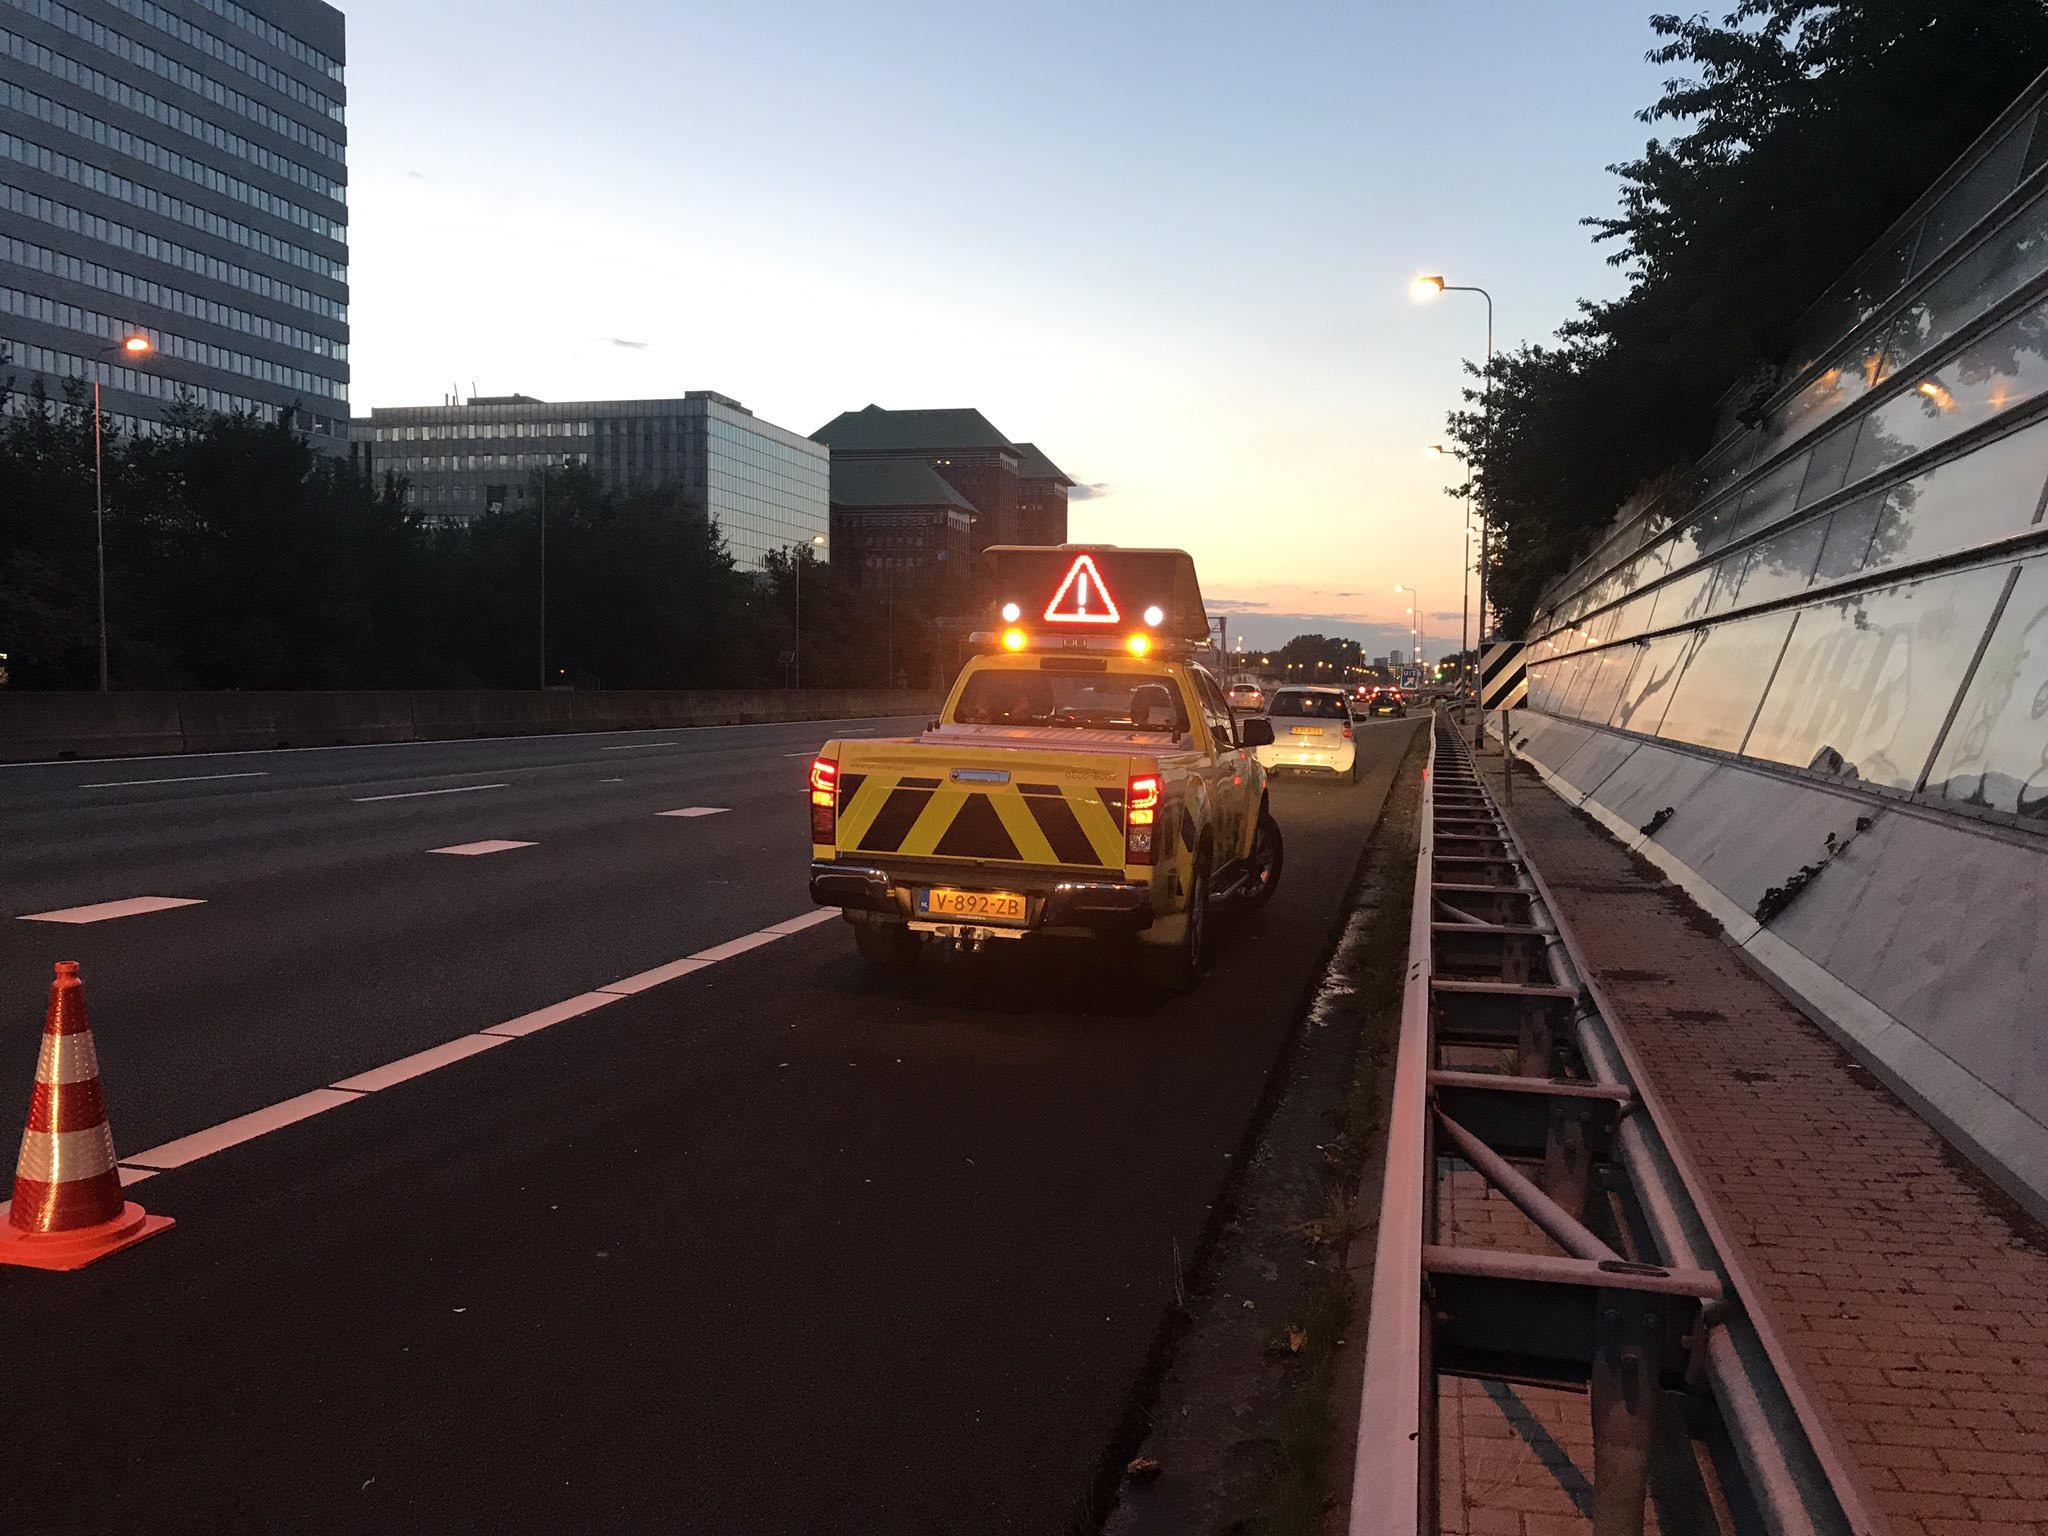 Rijkswaterstaat securing an abandoned vehicle on the A10 motorway on 20 June 2019 (photograph: Road Inspector Stefan)